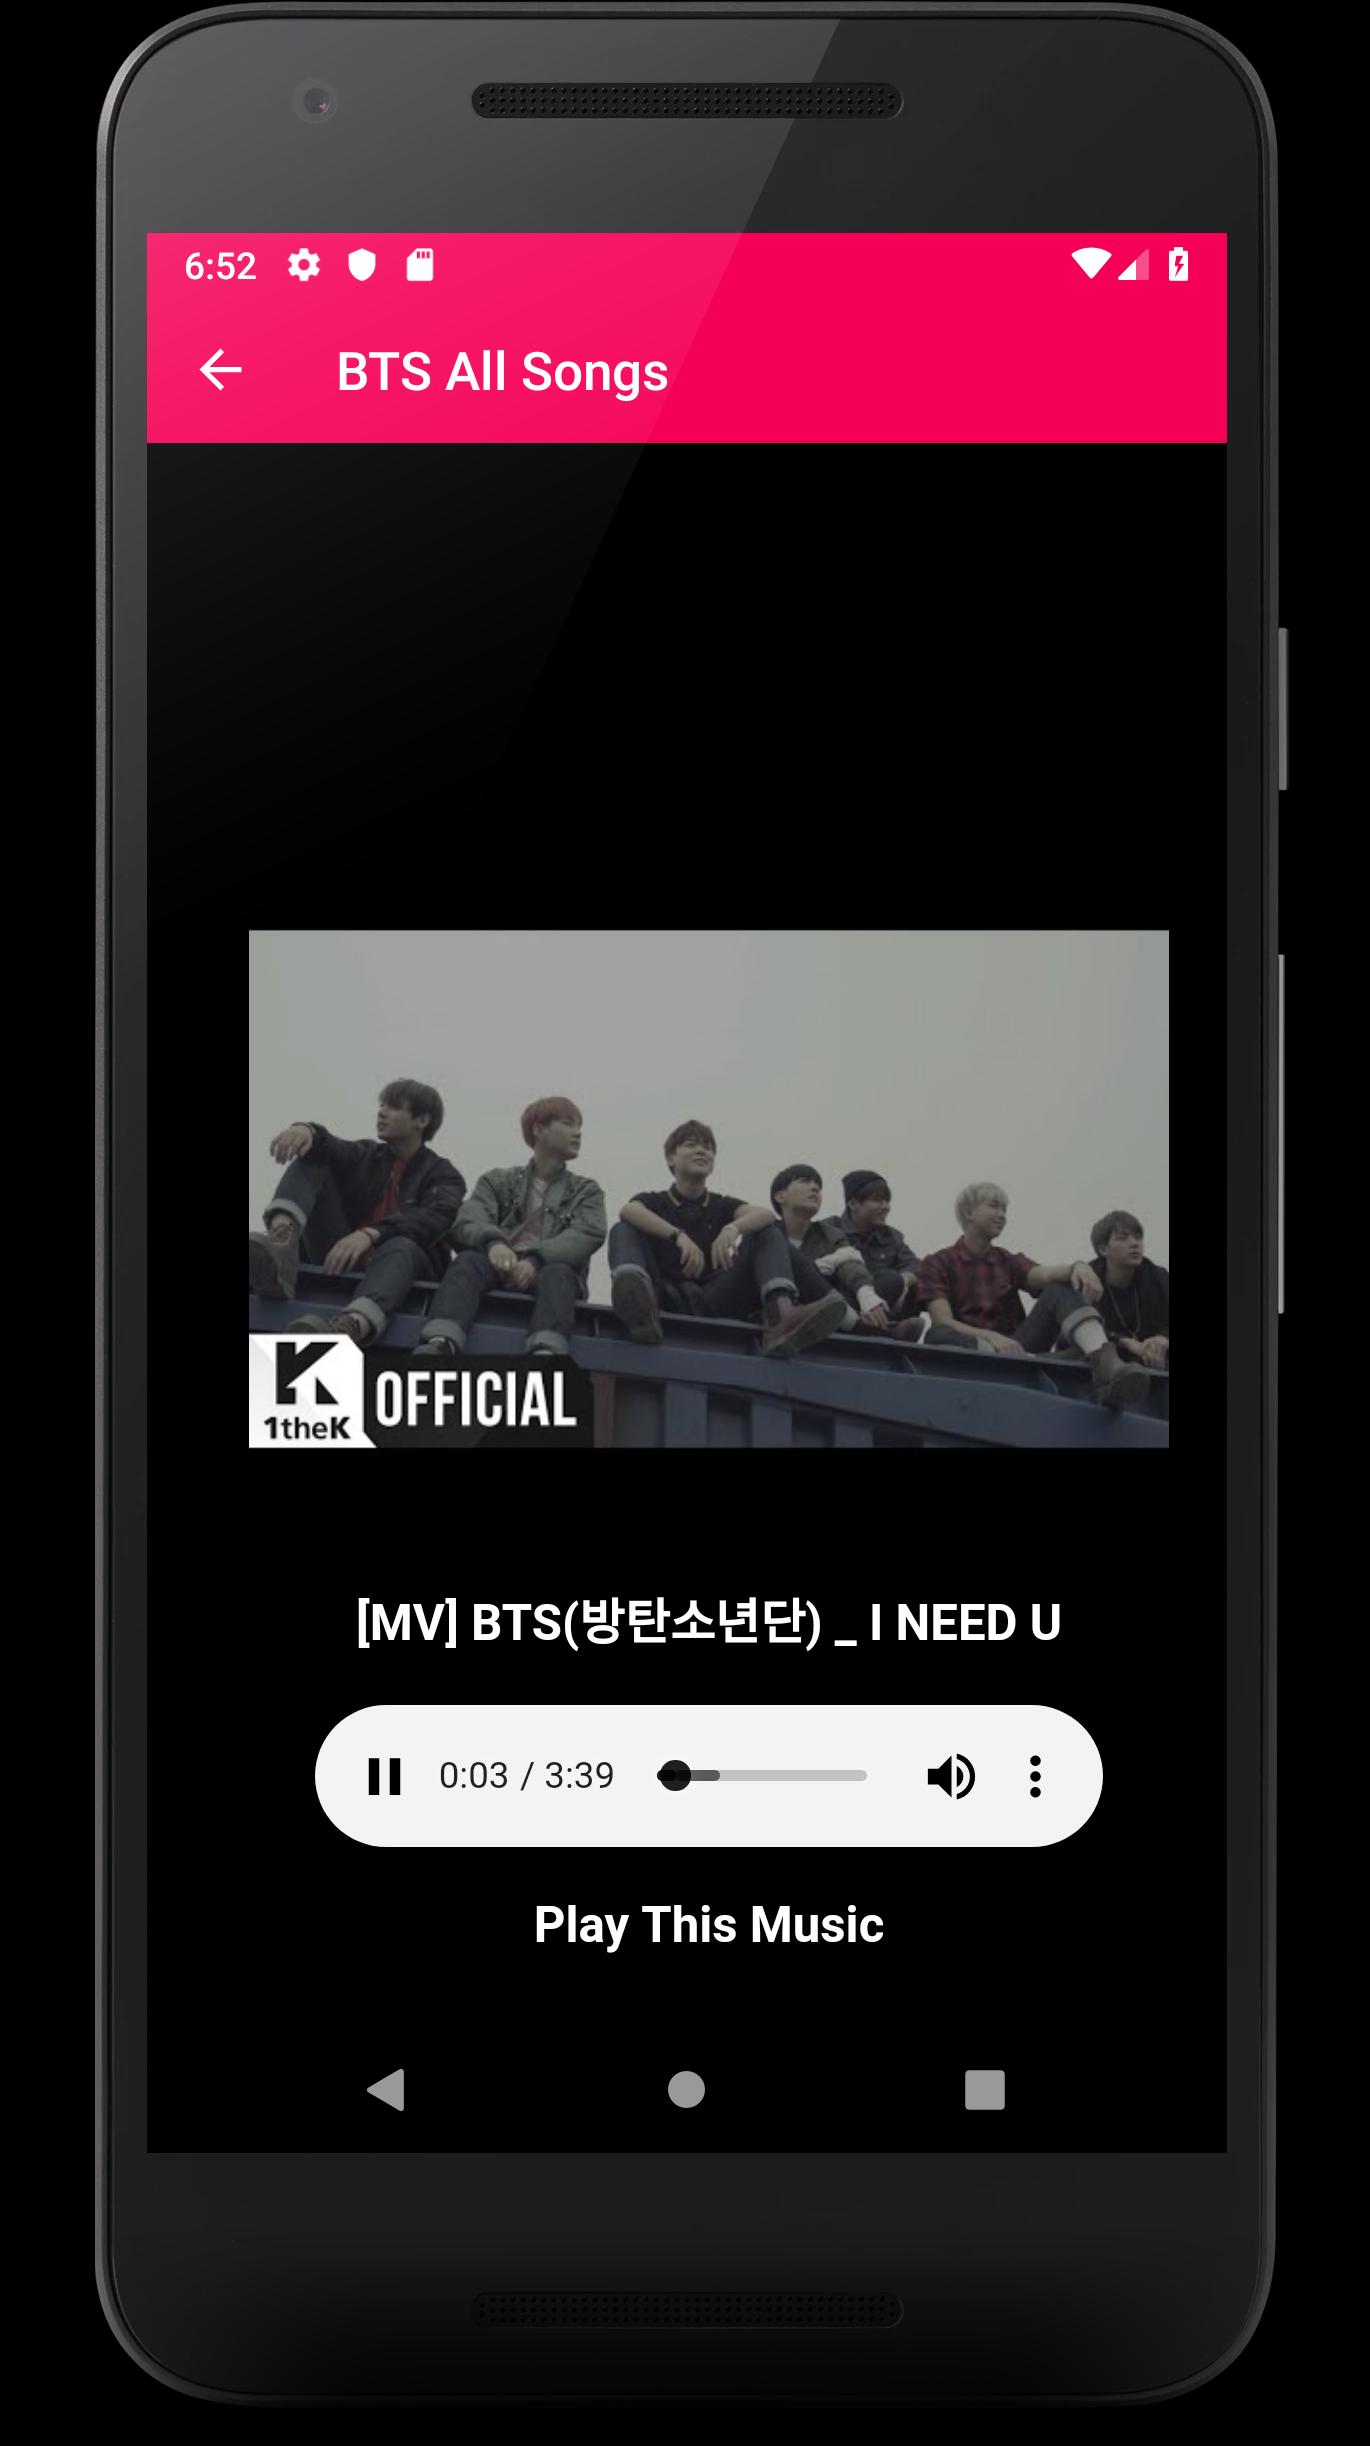 Bts All Music Video 2019 For Android Apk Download - music codes for roblox dna bts